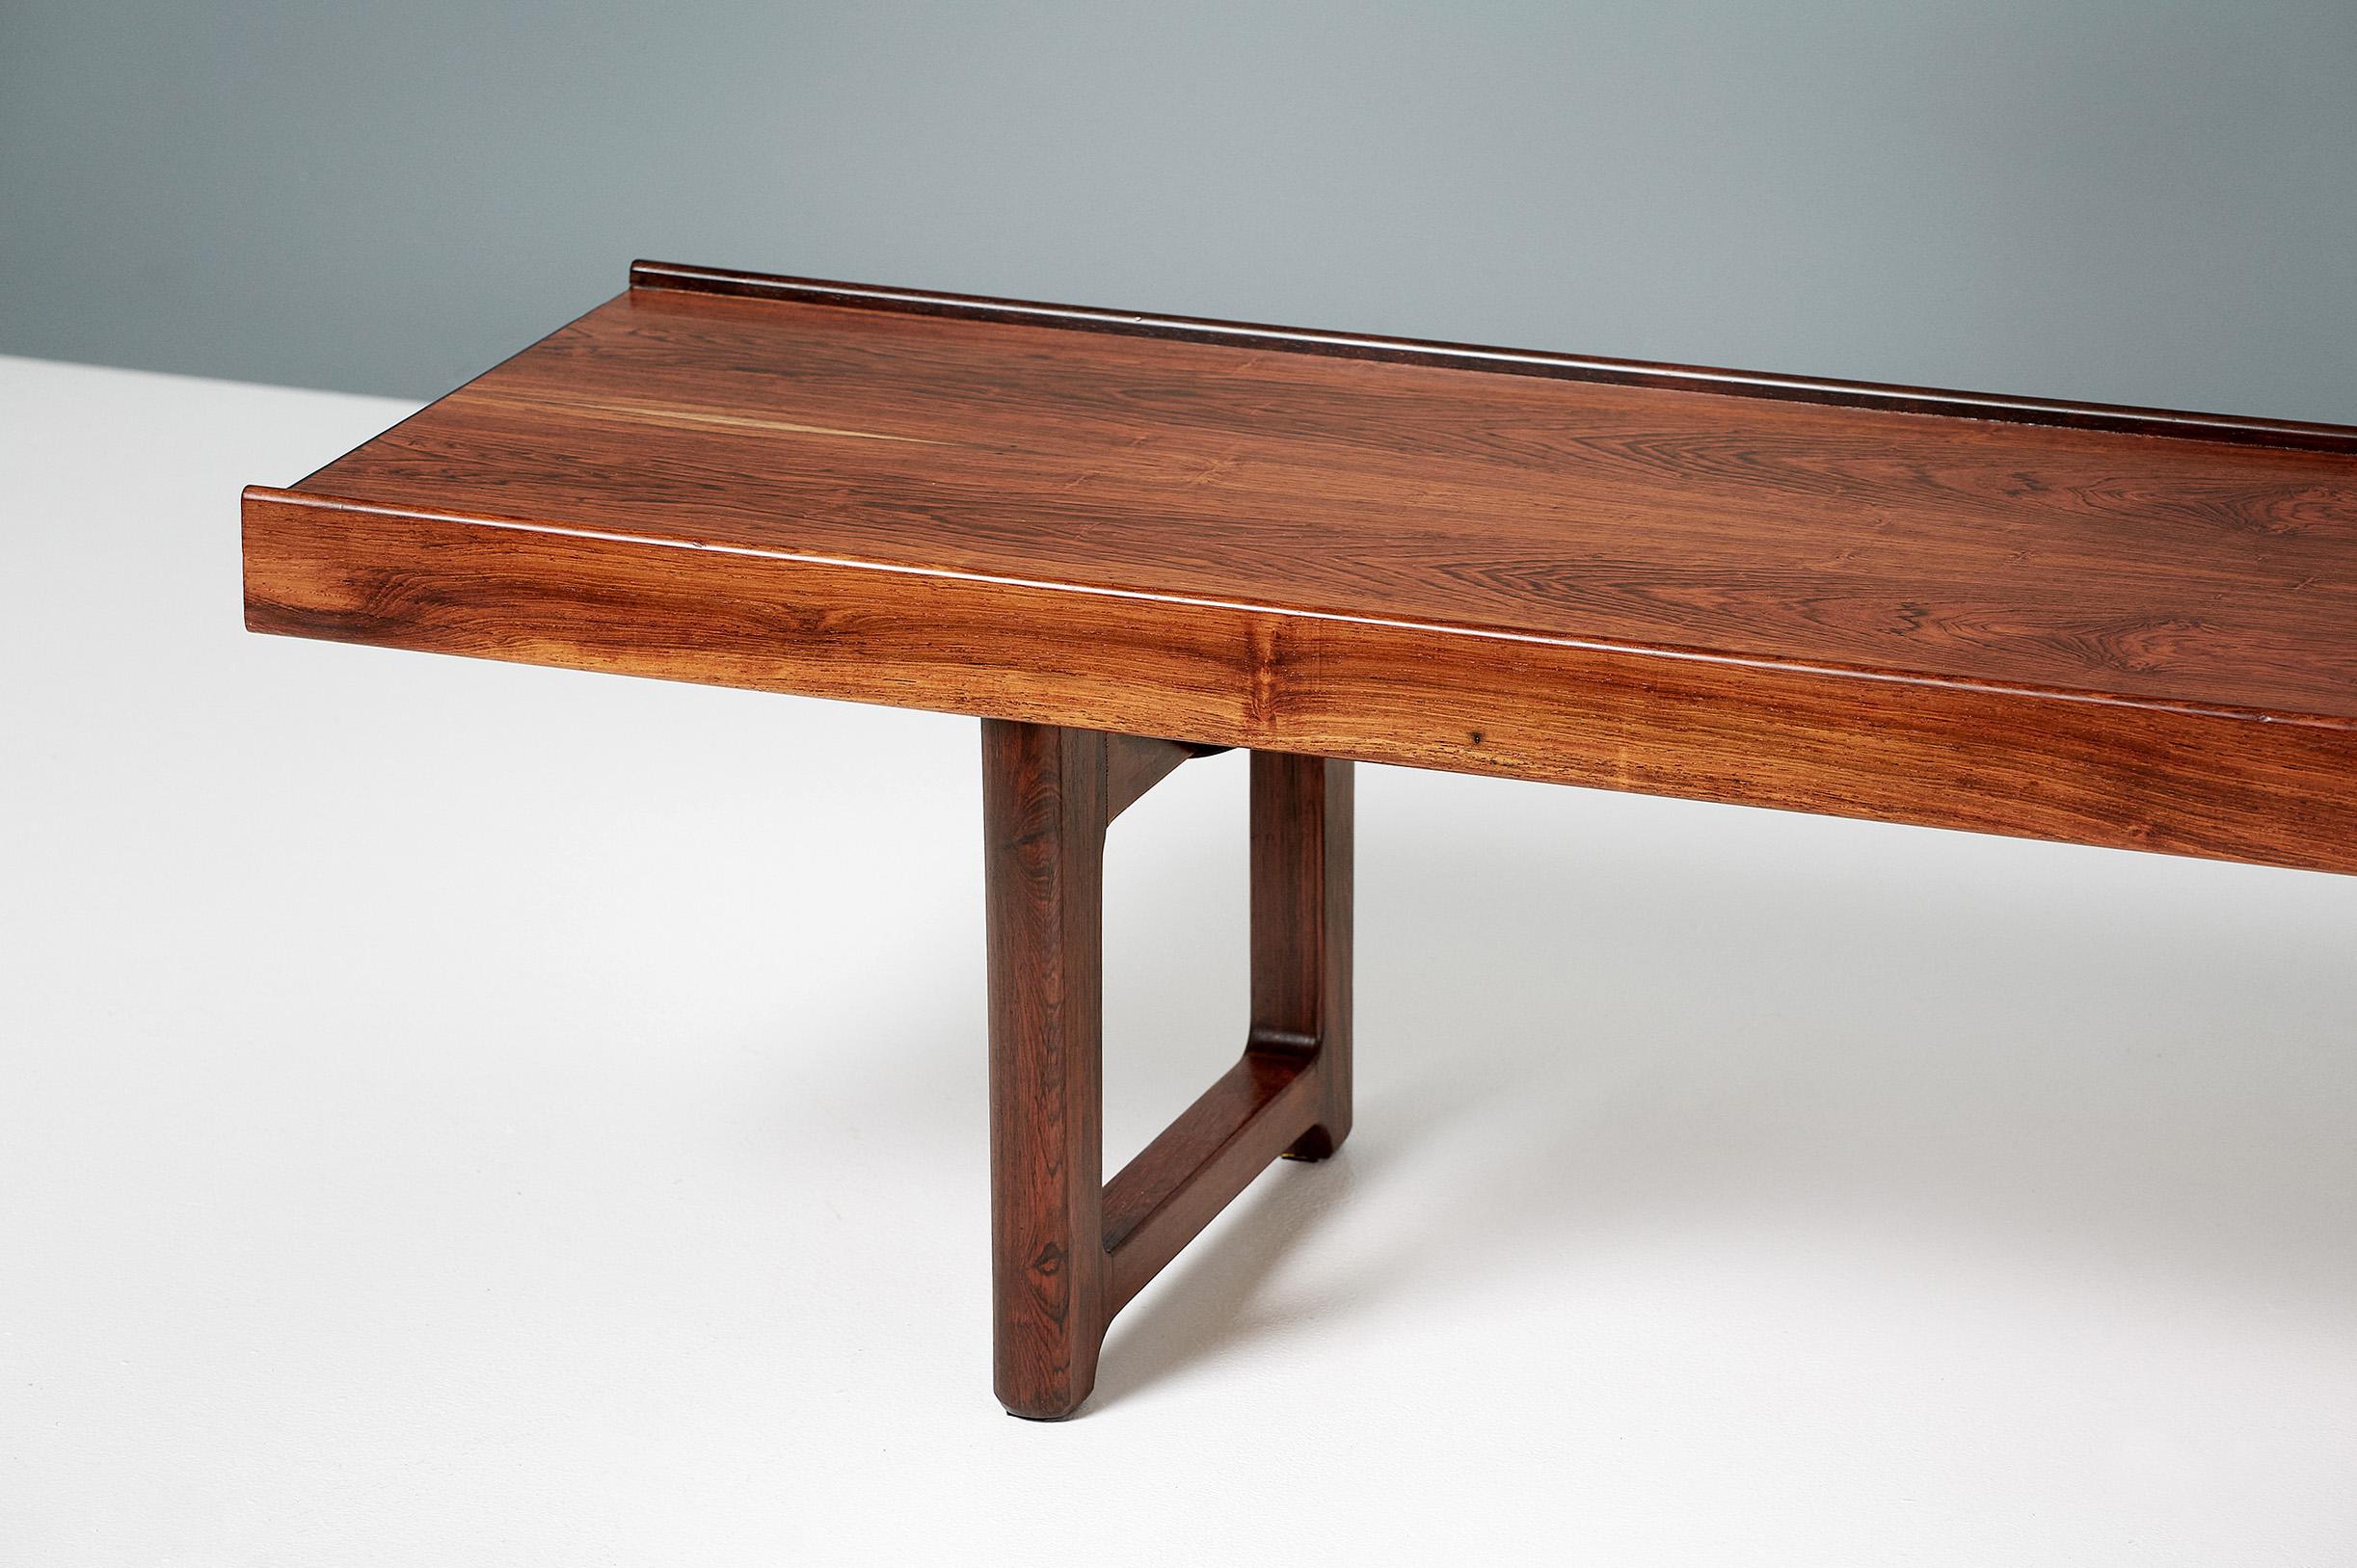 Torbjørn Afdal

Iconic midcentury design from Norway. Torbjorn Afdal's Krobo bench, circa 1960 was designed as a multipurpose bench for producer Bruksbo and can also be used as a low coffee table. This example comes in exquisite rosewood and has